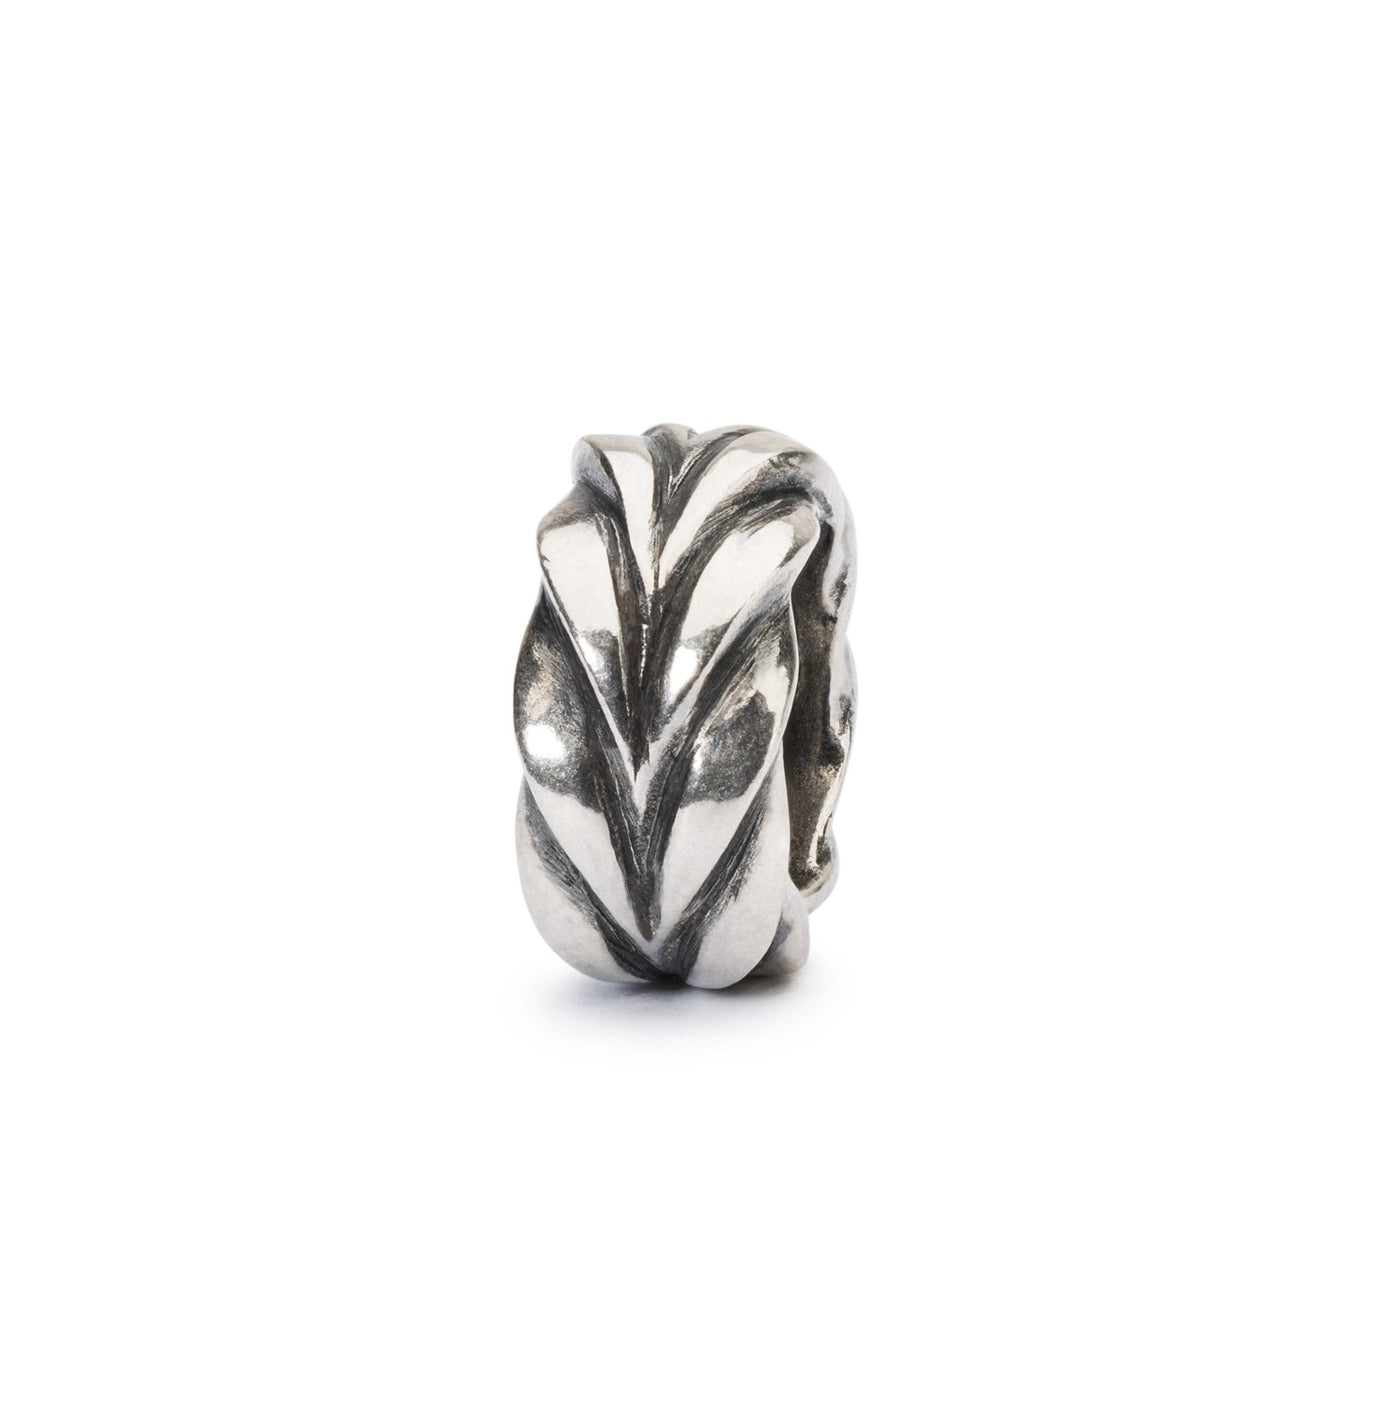 Sterling Silver spacer with a woven foxtail design, adding texture to your Trollbeads bracelet while preventing the beads from falling of.